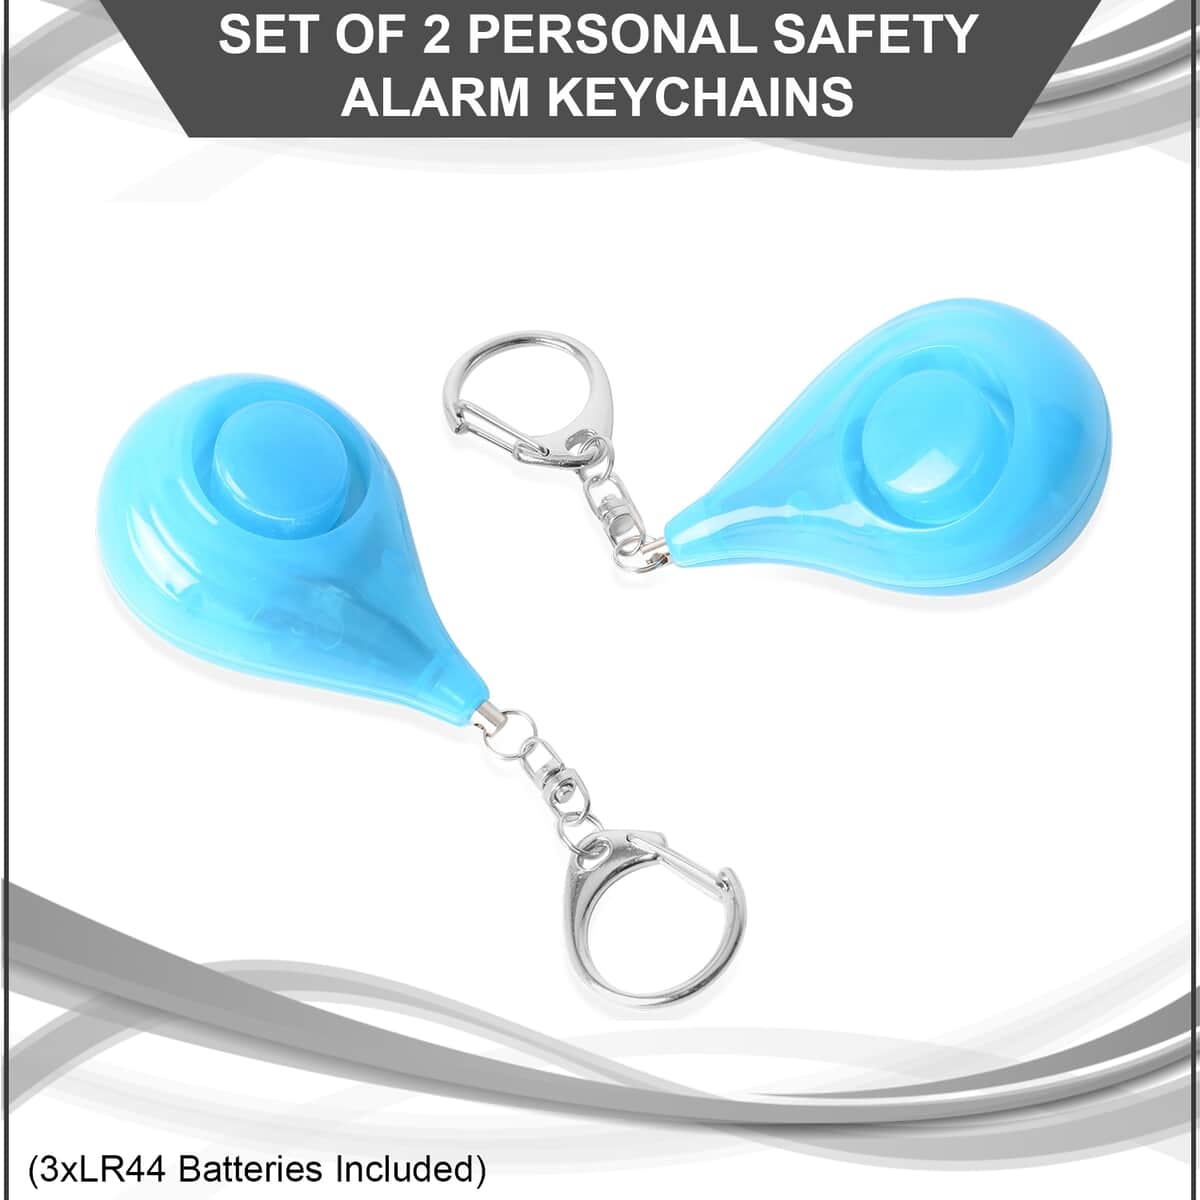 Set of 2 Personal Safety Blue Alarm Keychains (3xLR44 Batteries Included) image number 1